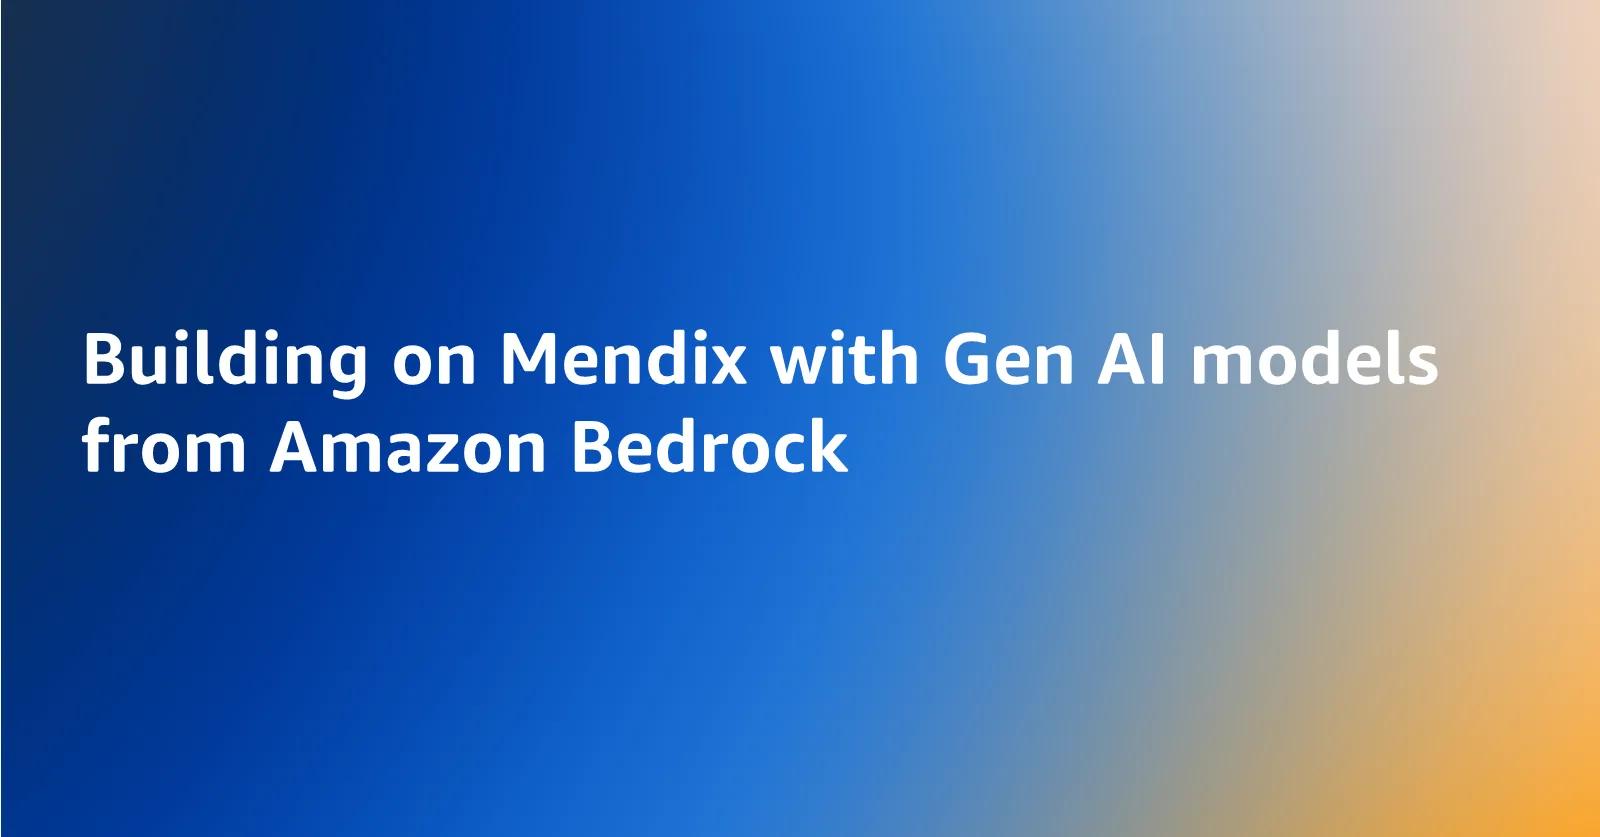 Building on Mendix with Gen AI models from Amazon Bedrock